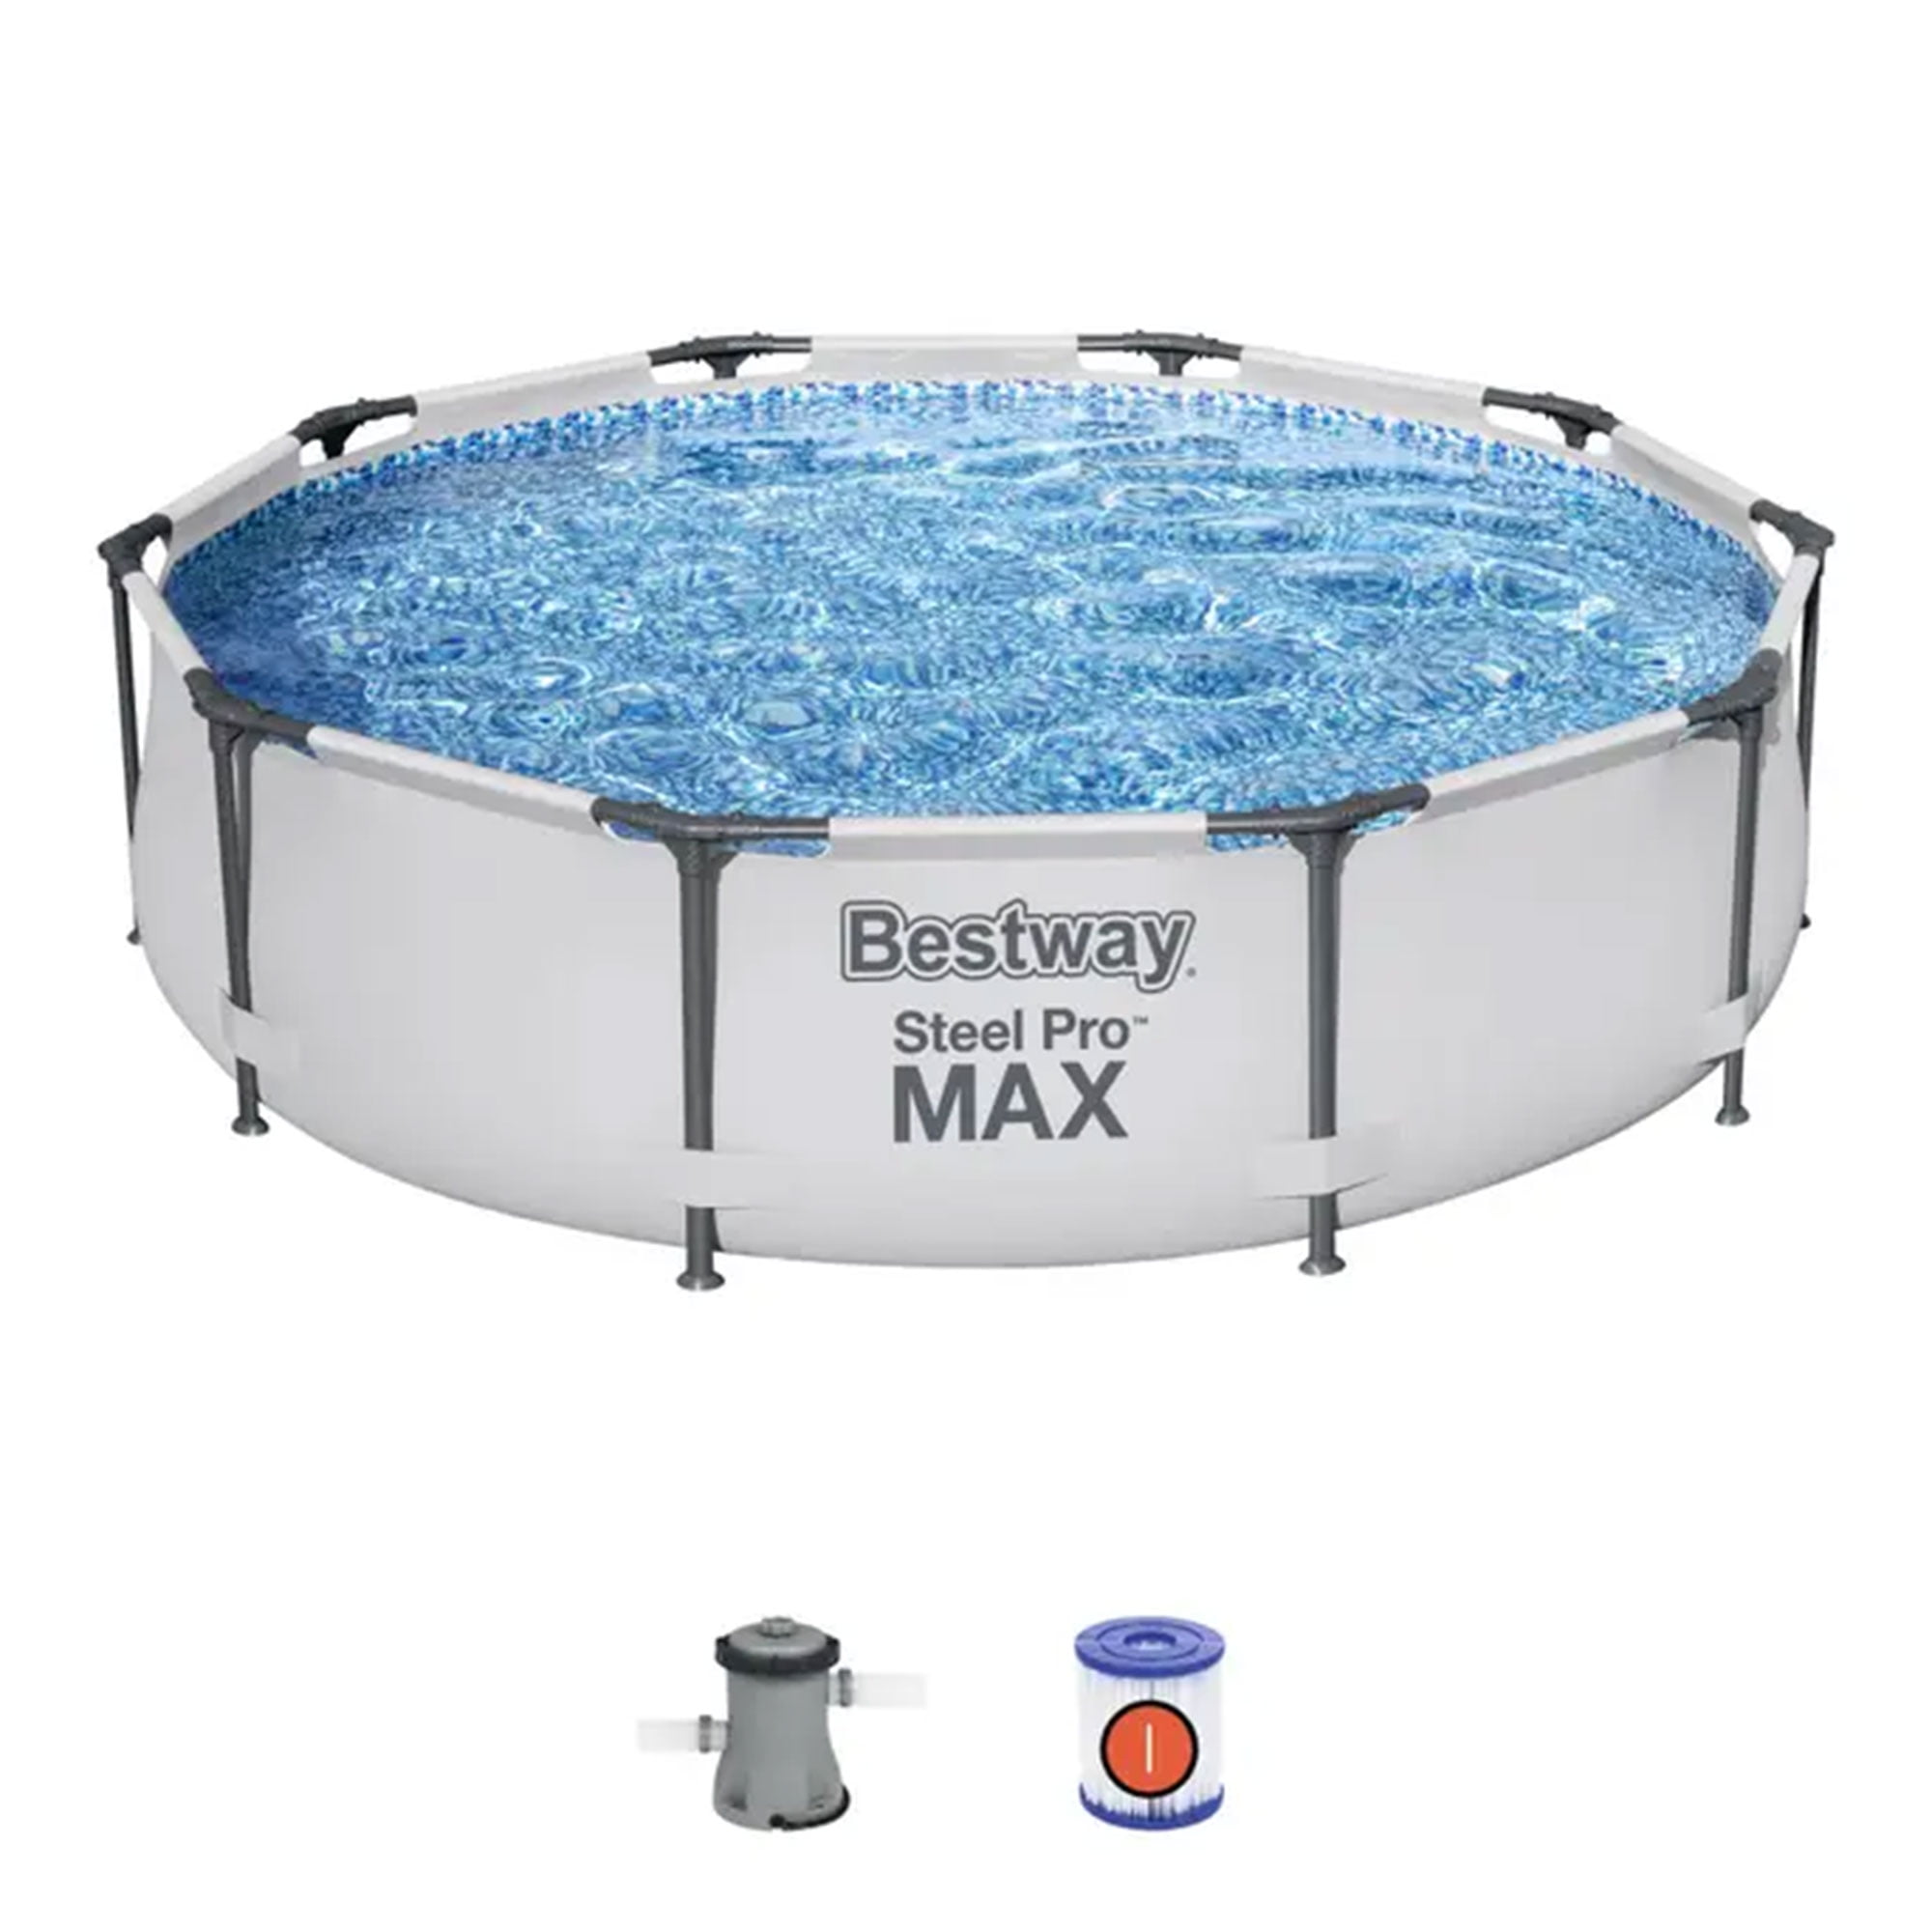 Bestway Steel Pro MAX 10'x30" Above Ground Outdoor Round Swimming Pool with Pump and Metal Frame $94.99 + Free Shipping